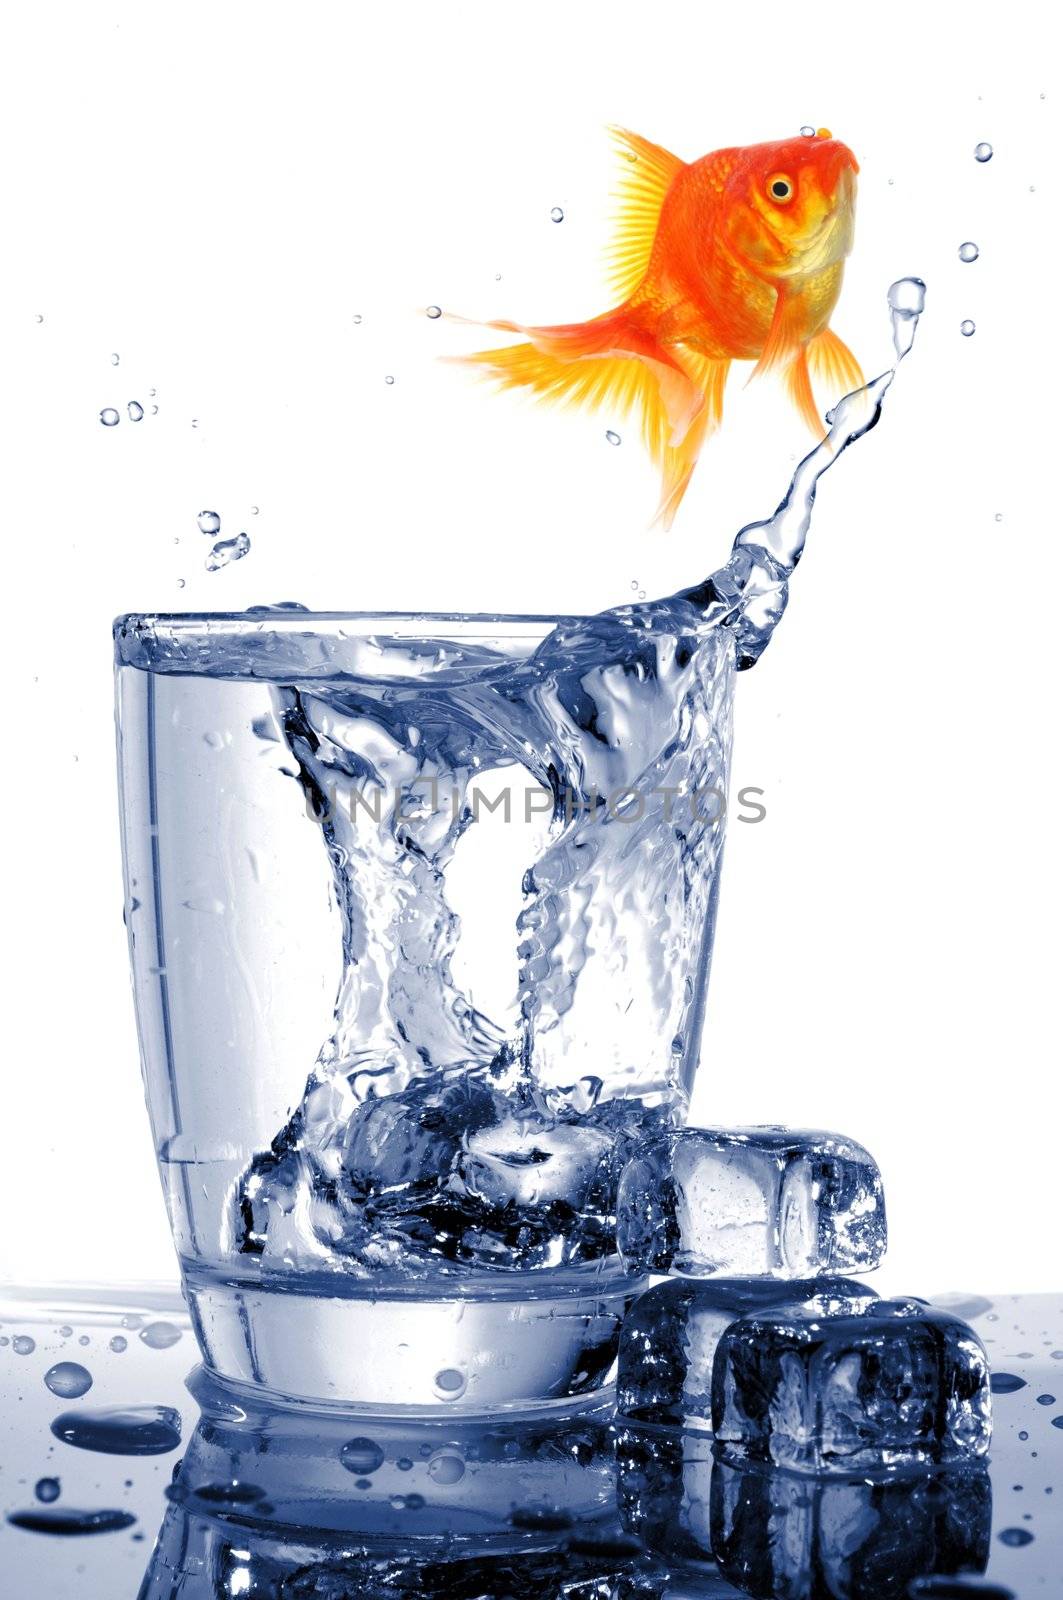 goldfish in drink glass showing jail prison free or freedom concept